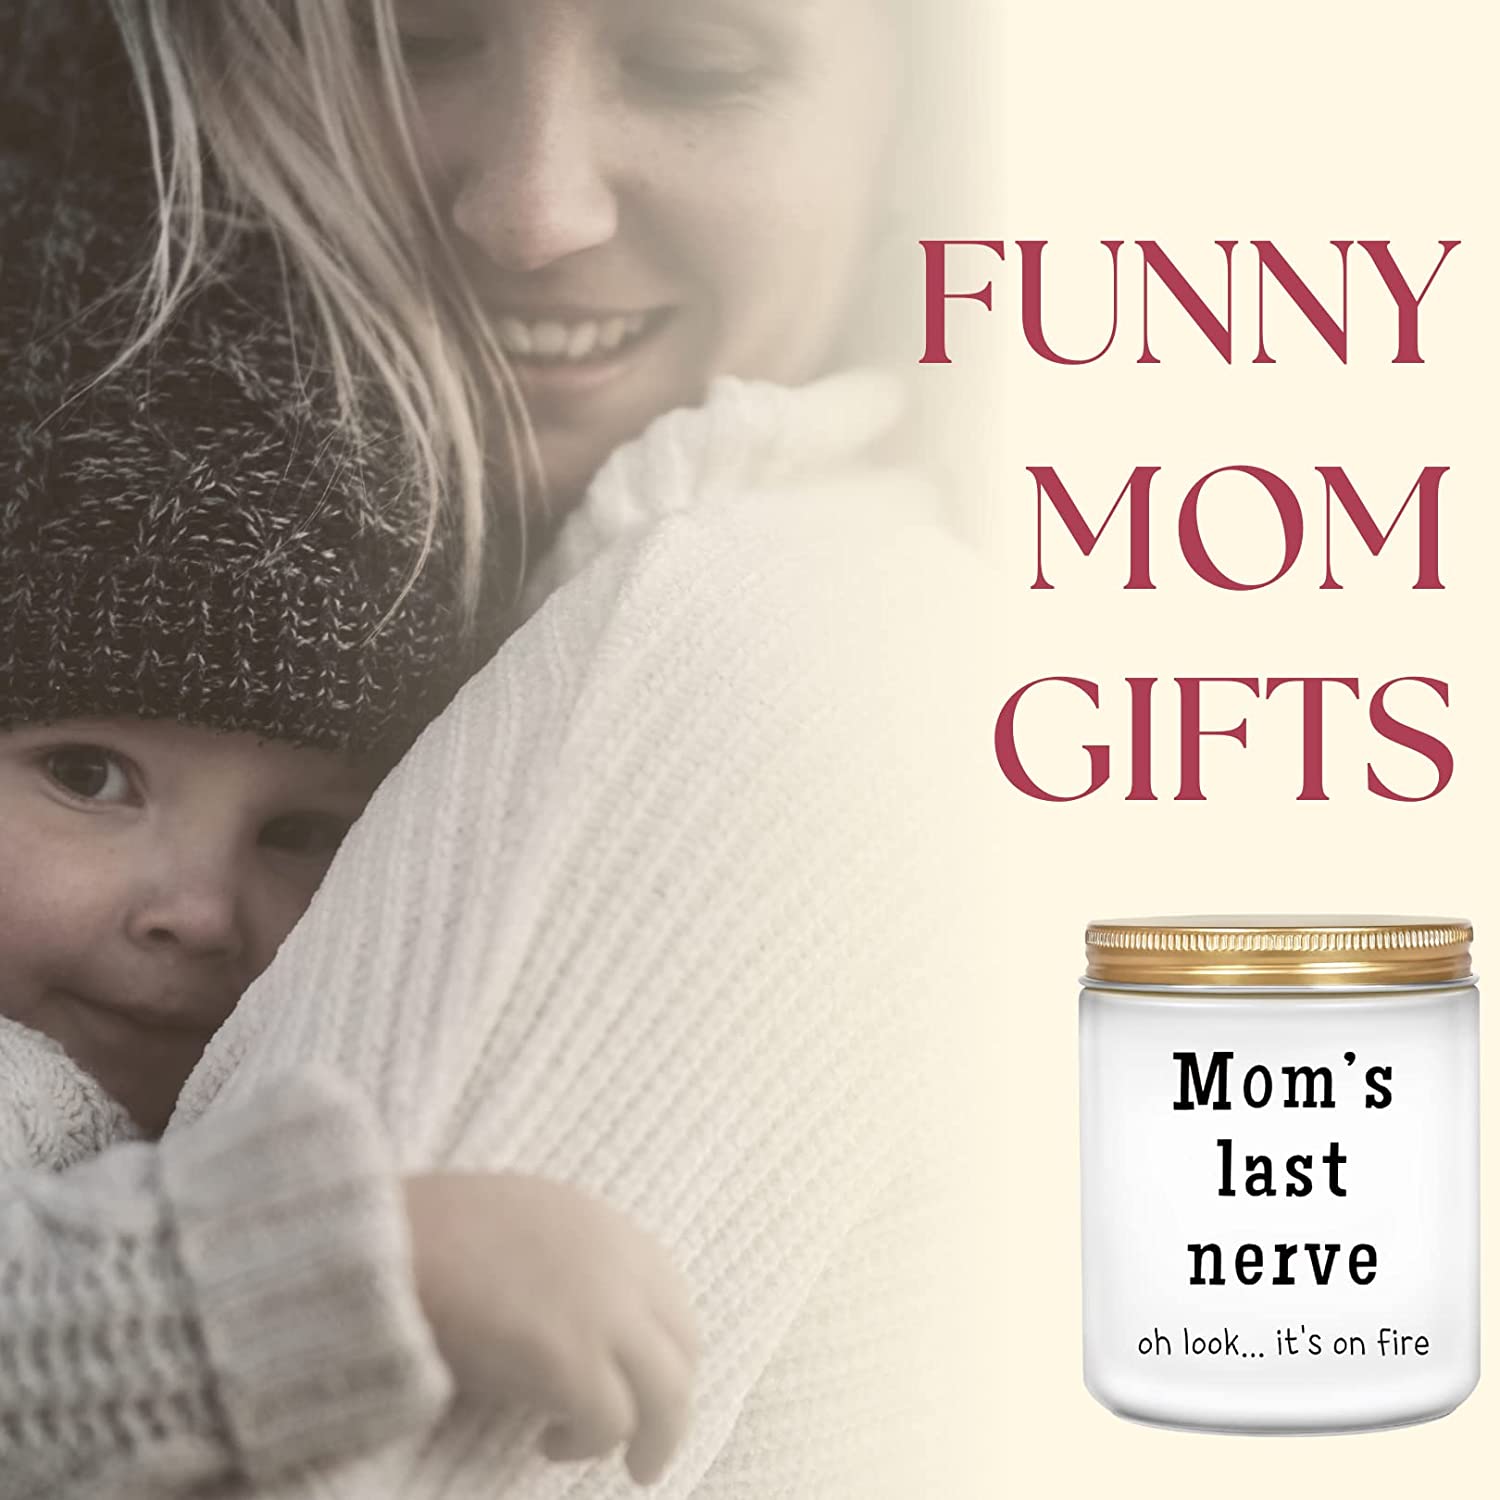 A mother is hugging a child. There is also a white candle which has text on the jar that says, 'Moms last nerve oh look it's on fire.' The text says, 'Funny mom gifts.'